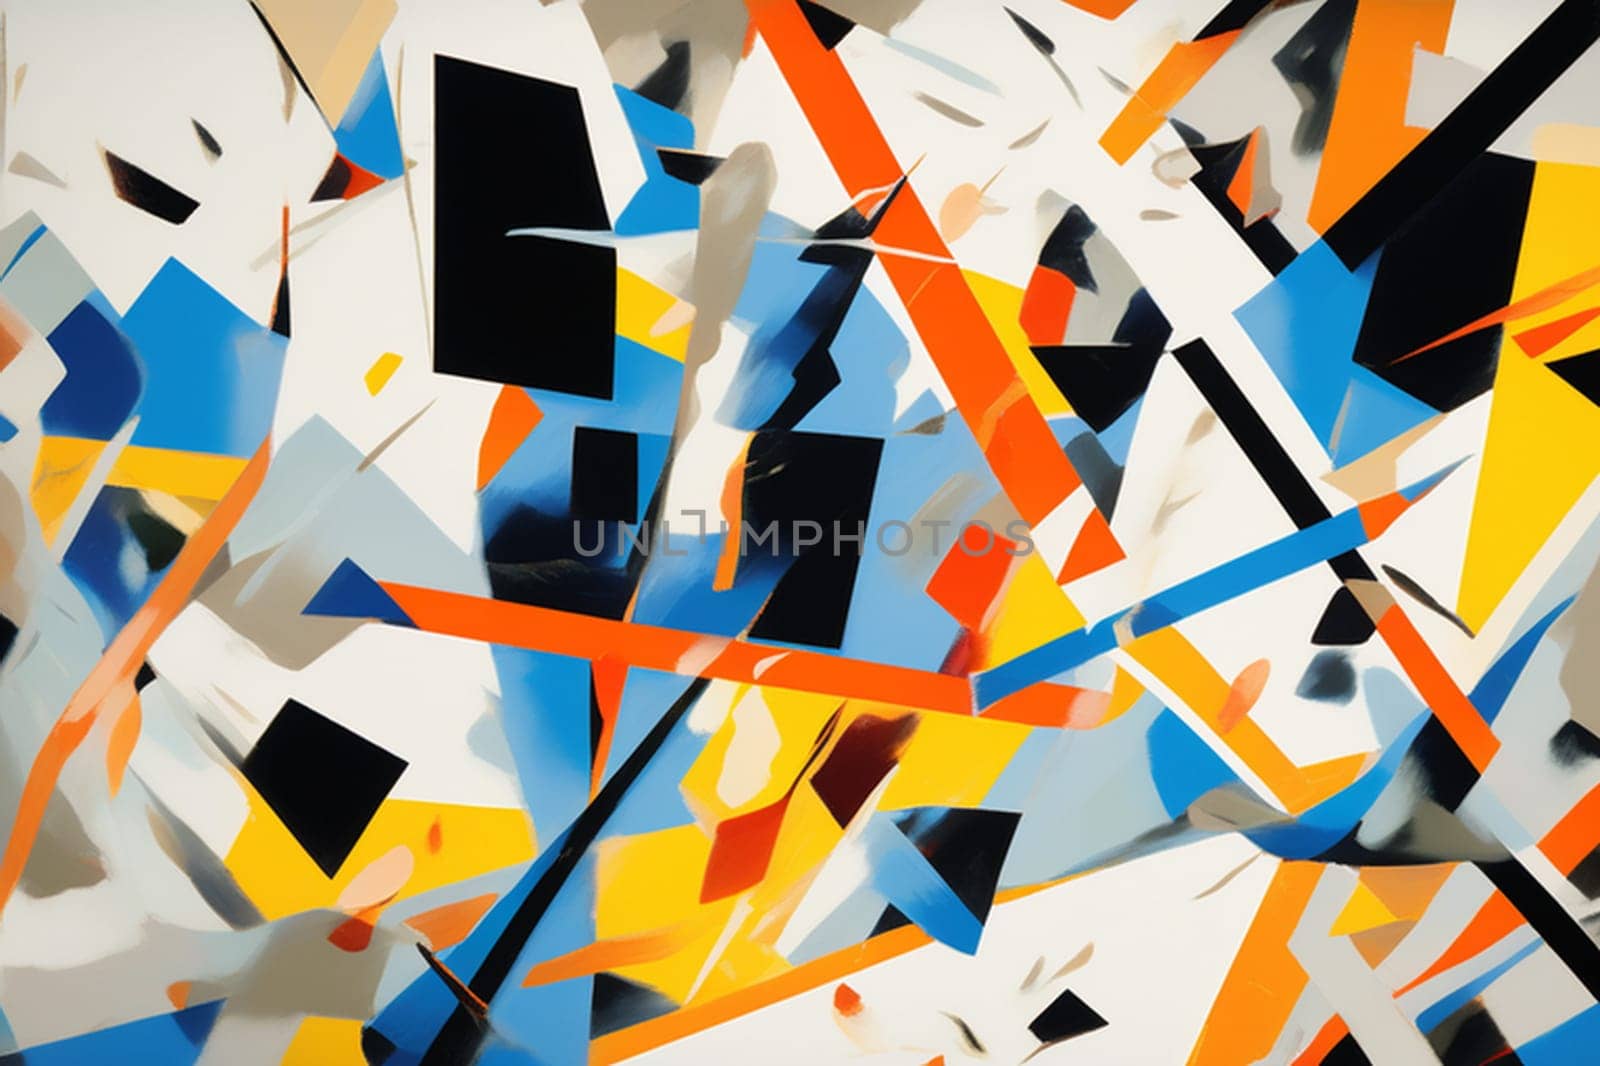 A vibrant abstract painting featuring triangles and rectangles in various shades of orange on a white background